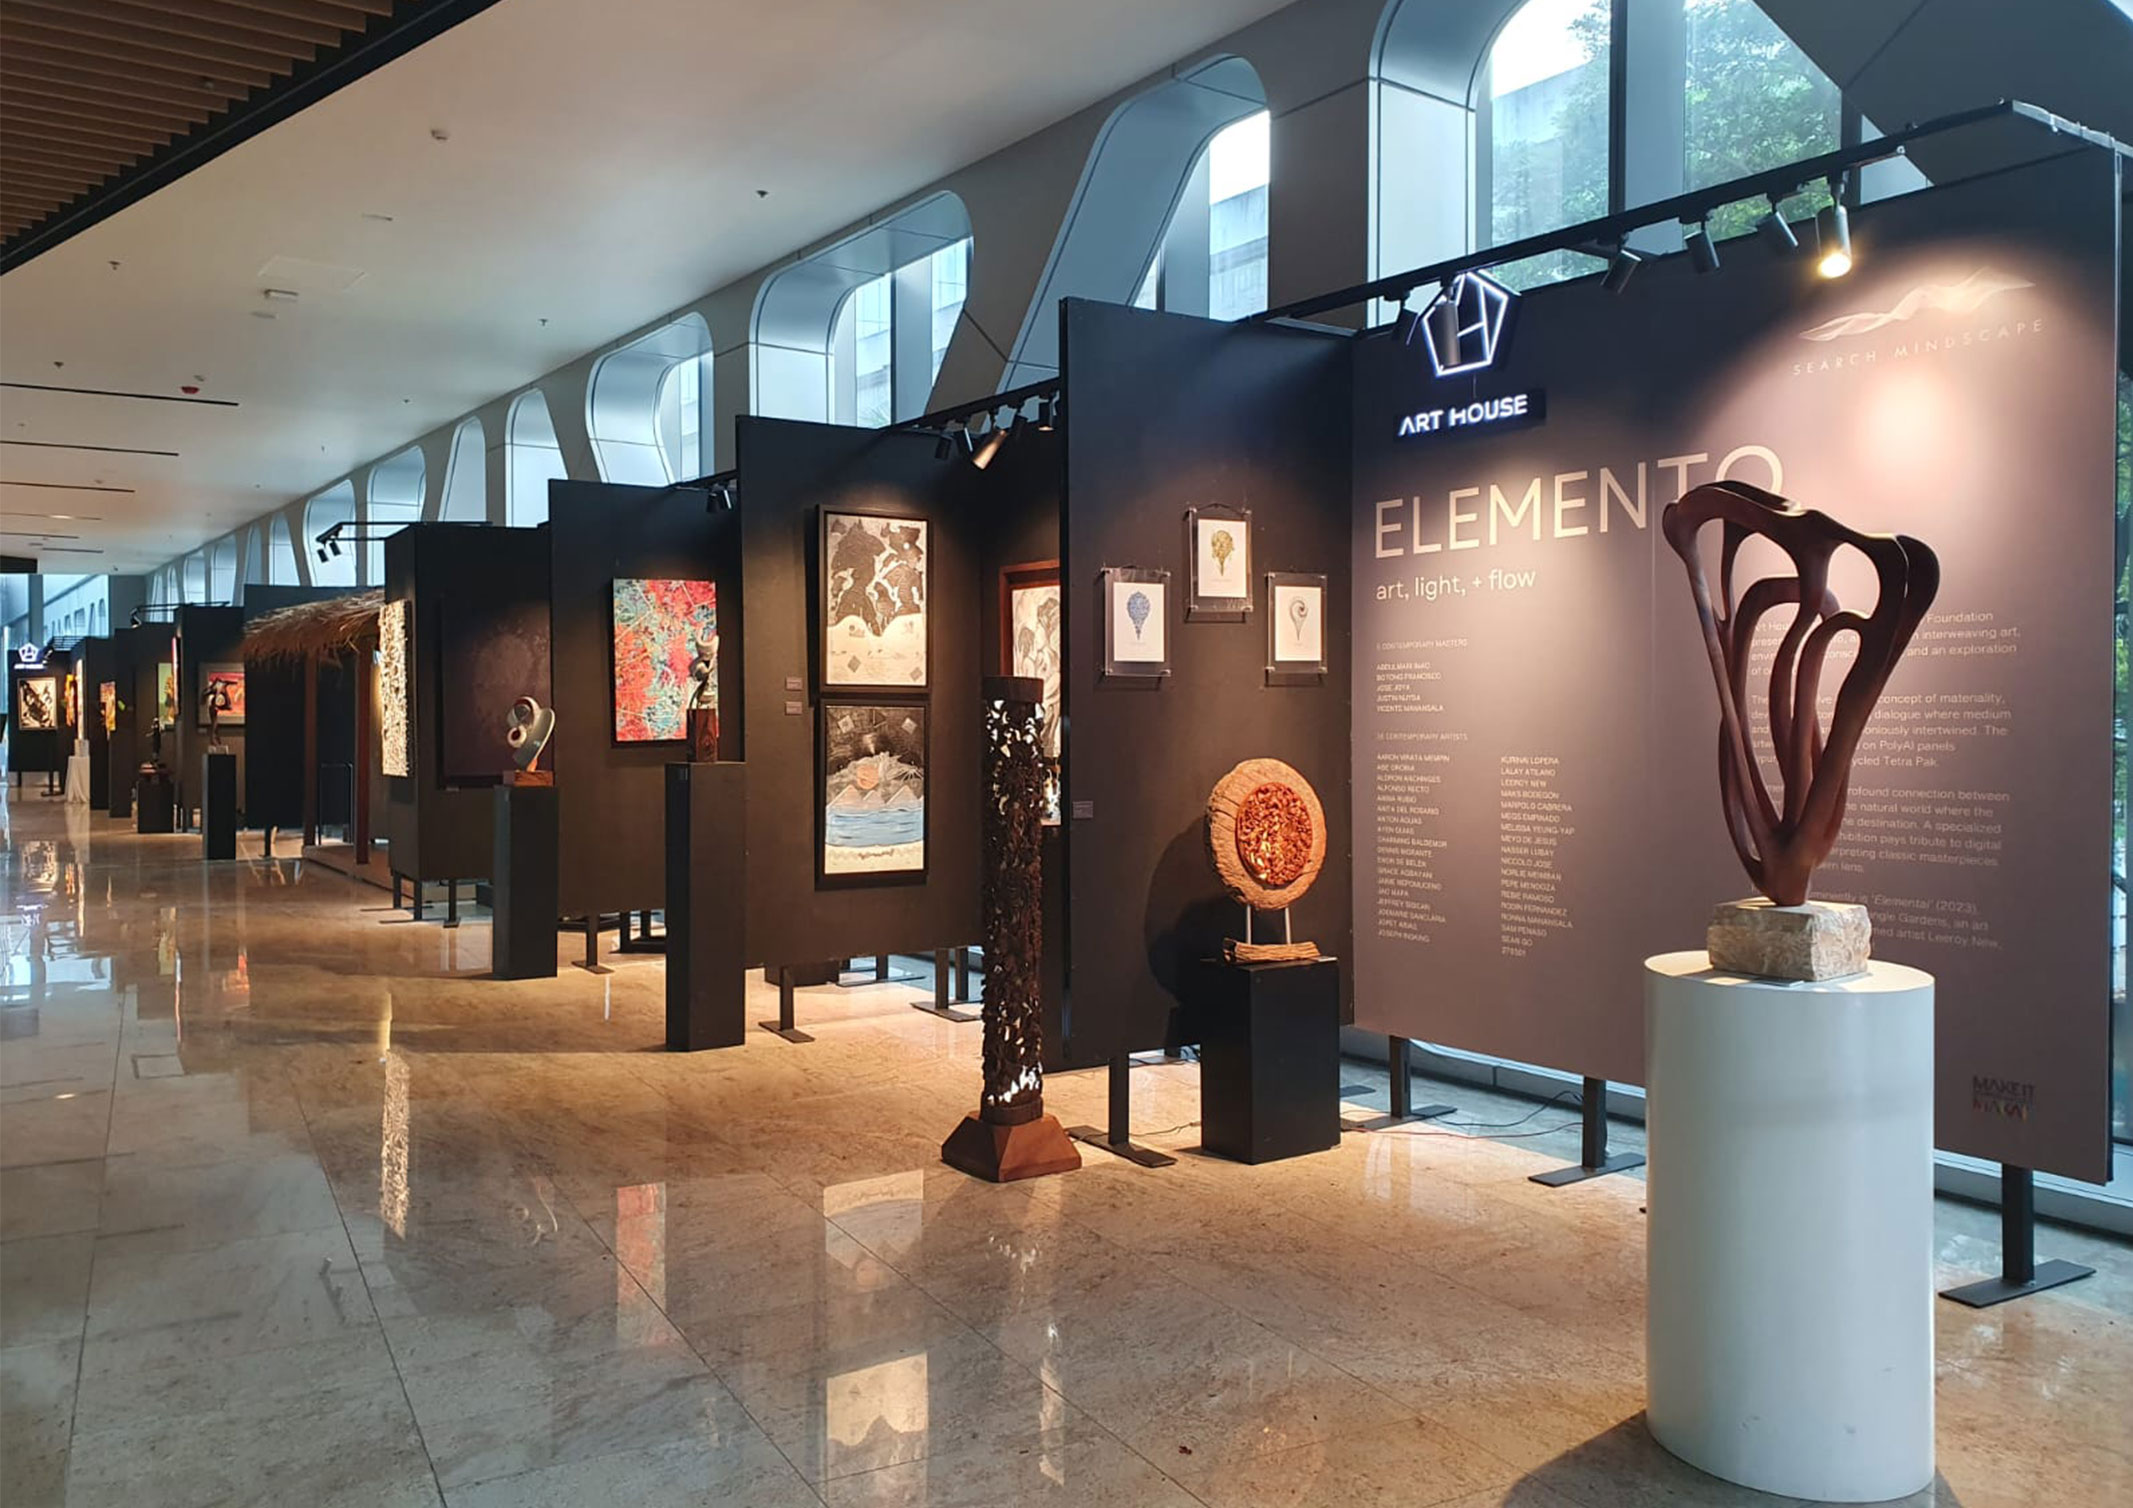 Elemento Indoor Art Gallery featuring work from contemporary Filipino artists